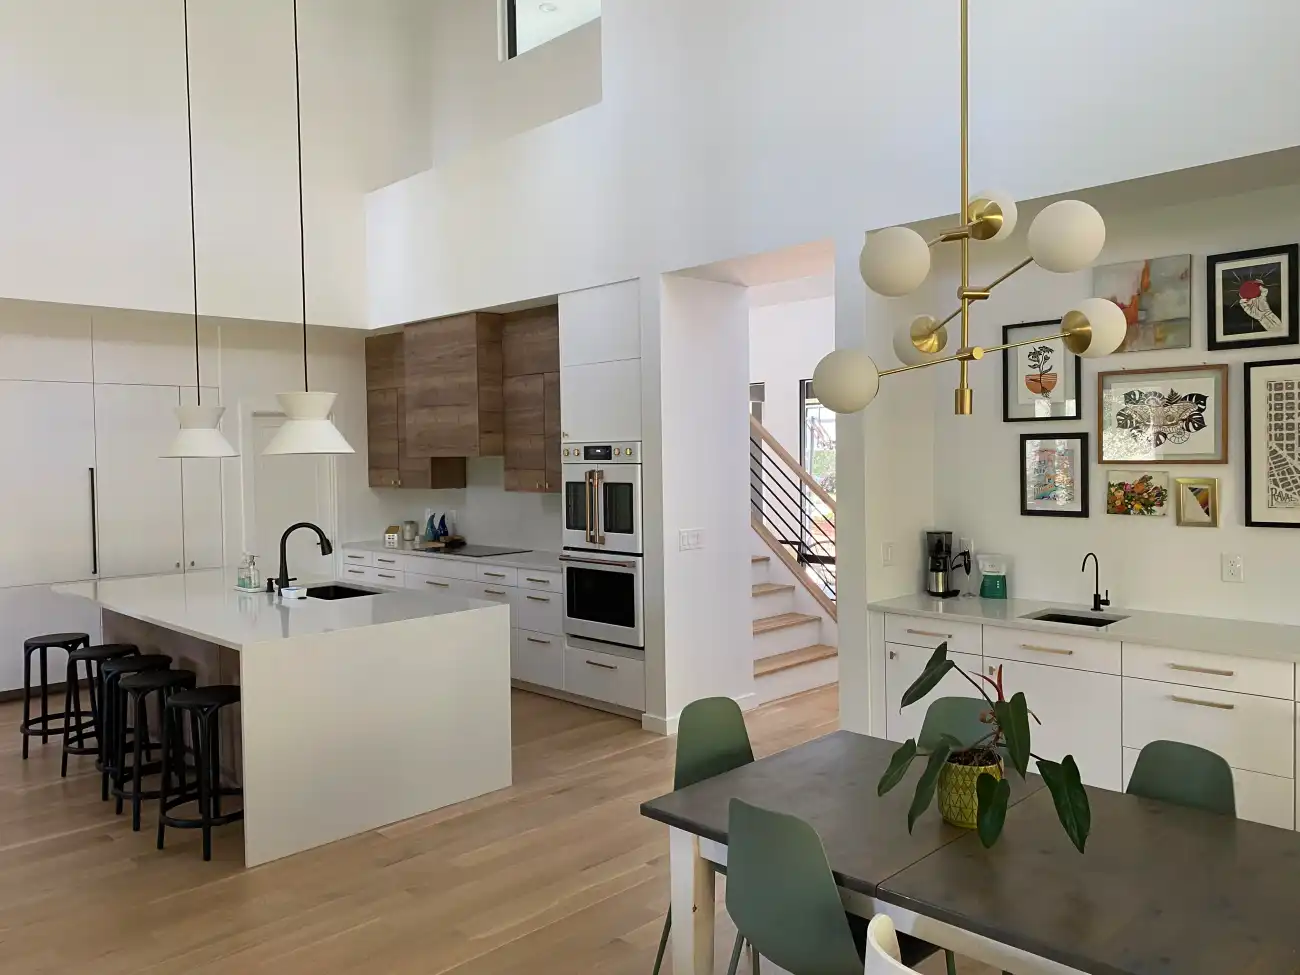 A Kid Friendly Kitchen for a Modern Family intro